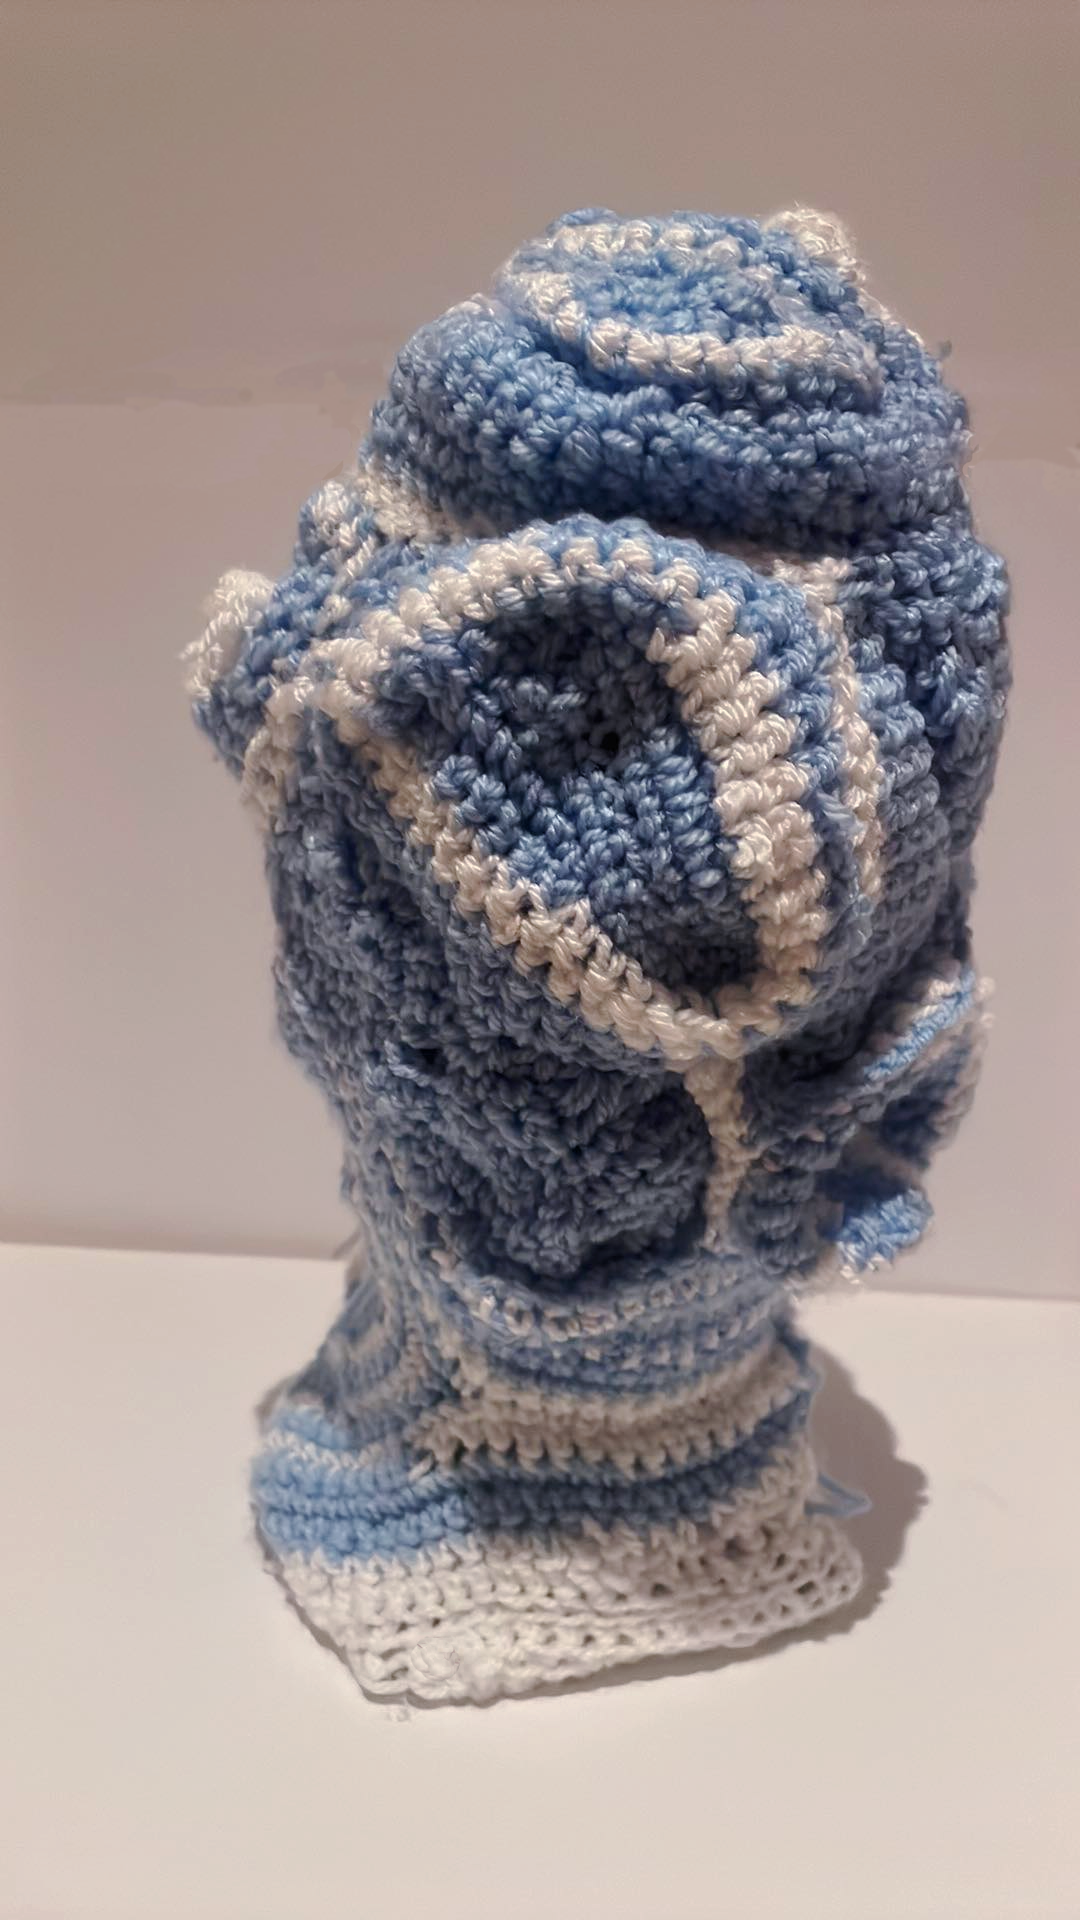 Knitted sculpture